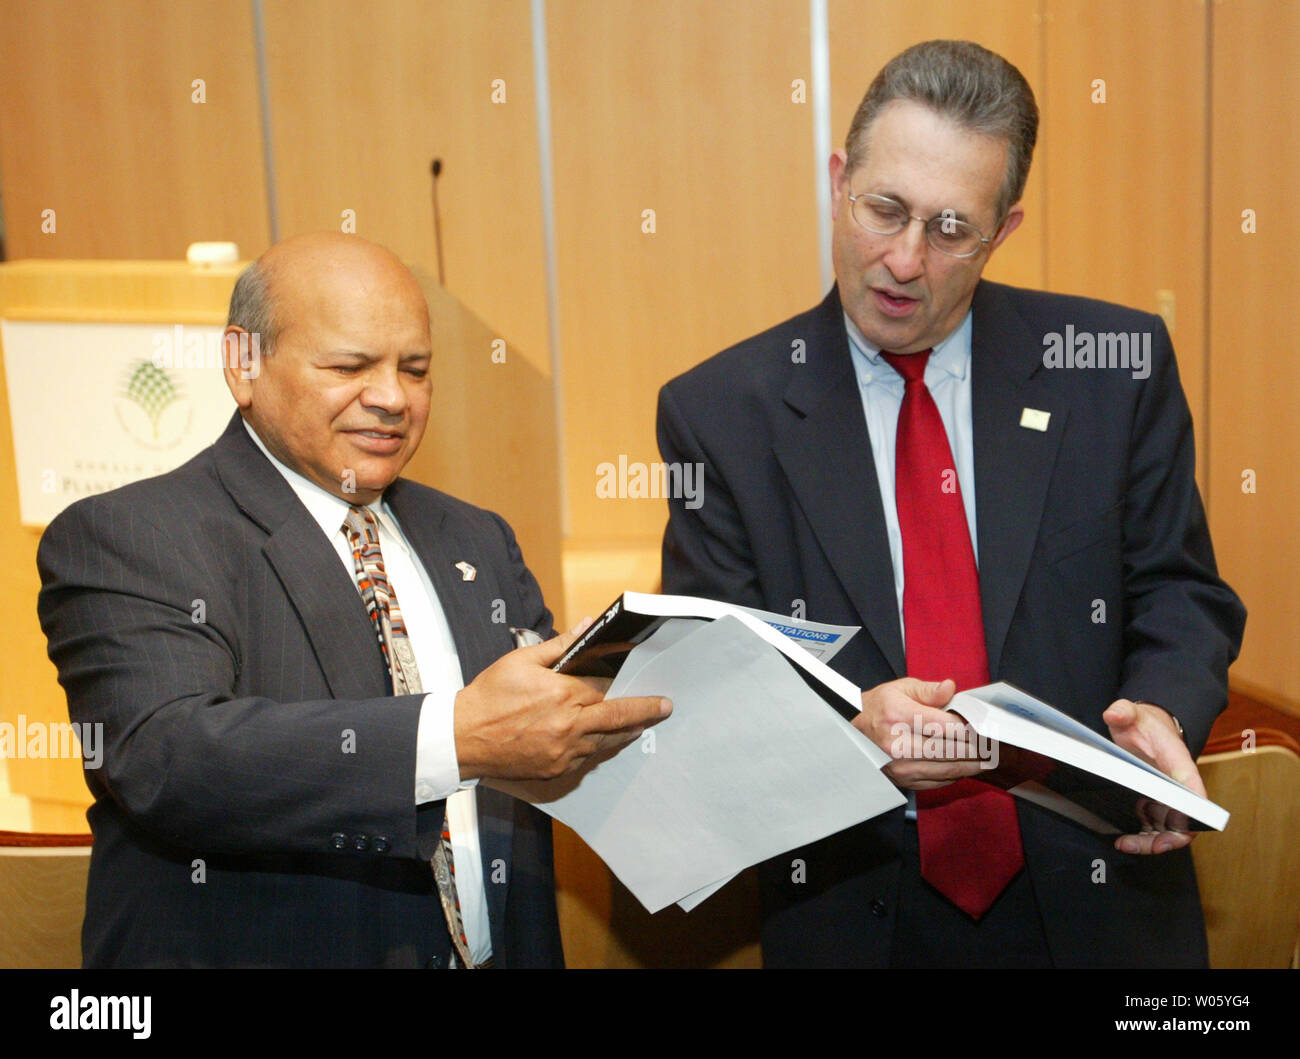 Dr. Surendra Gupta, Ph.D., president of the St. Louis-based American Radiolabeled Chemicals, Inc. (L) shows his product catalogue to E. Anthony Wayne, U.S. Assistant Secretary of State before receiving the Export Achievement Certificate by the U.S. Department of Commerce at the Danforth Plant Science Center in Creve Coeur, Mo on October 1, 2004. American Radiolabeled Chemicals, Inc. specializes in the production and worldwide distribution of a wide variety of radiochemicals for drug metabolism studies. It is ranked third in the world for overall sales and first in the number and type of produc Stock Photo